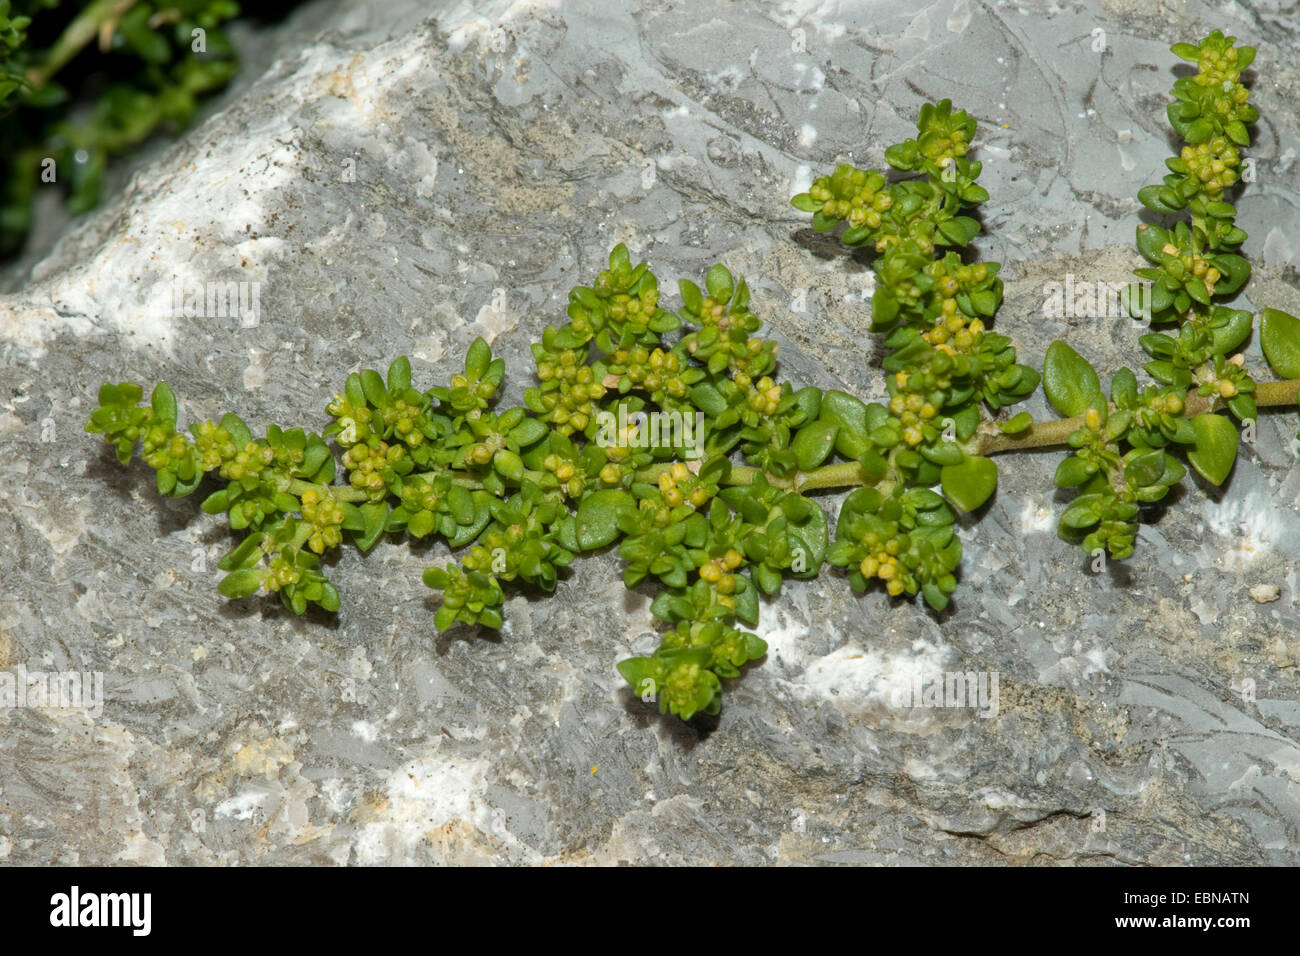 smooth rupturewort, smooth burstwort (Herniaria glabra), blooming on a rock, Germany Stock Photo